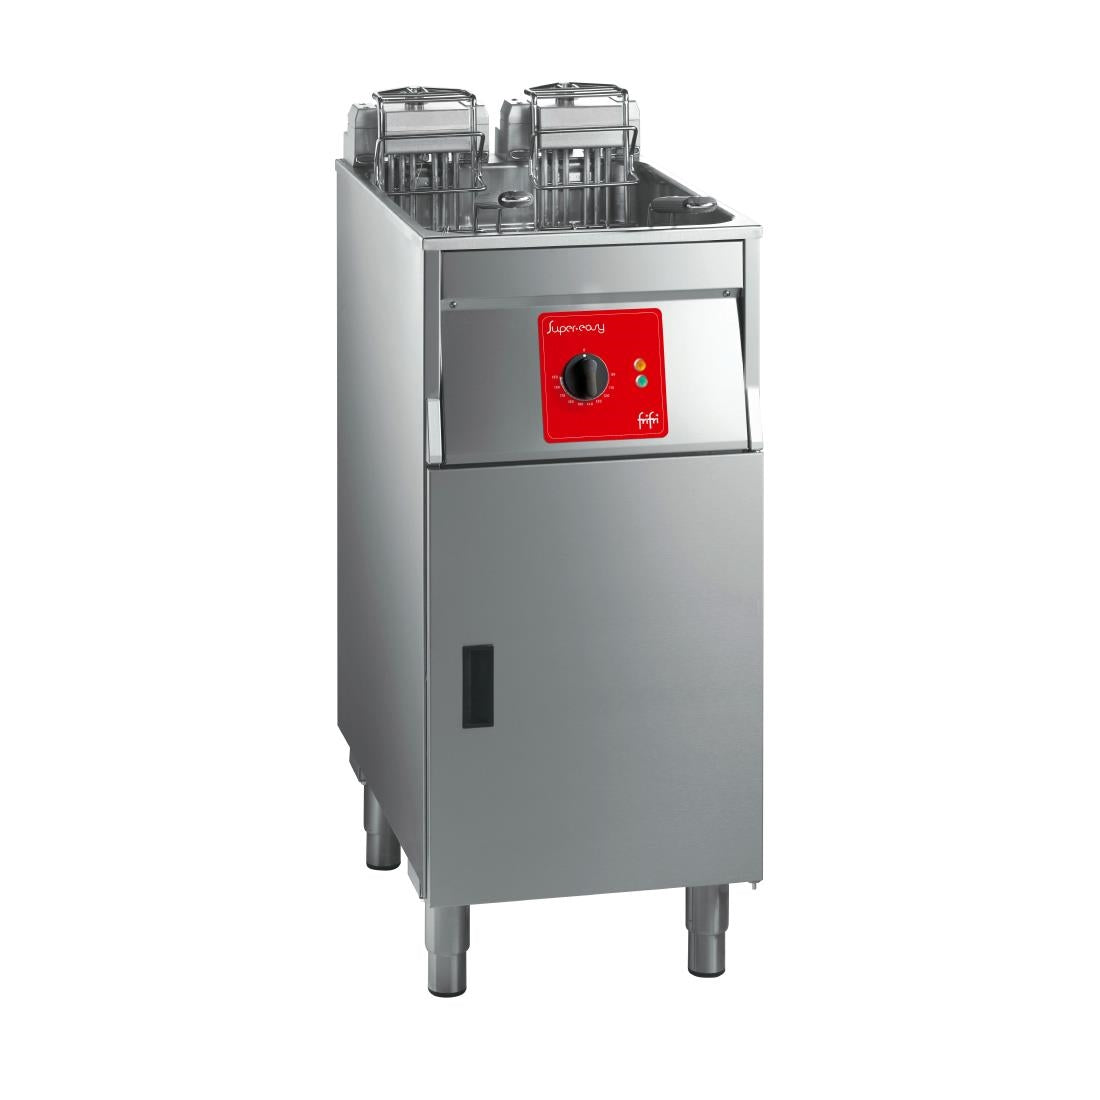 HS060-3PH FriFri Super Easy 412 Electric Free-Standing Single Tank Fryer with Filtration 2 Baskets 22kW - Three Phase